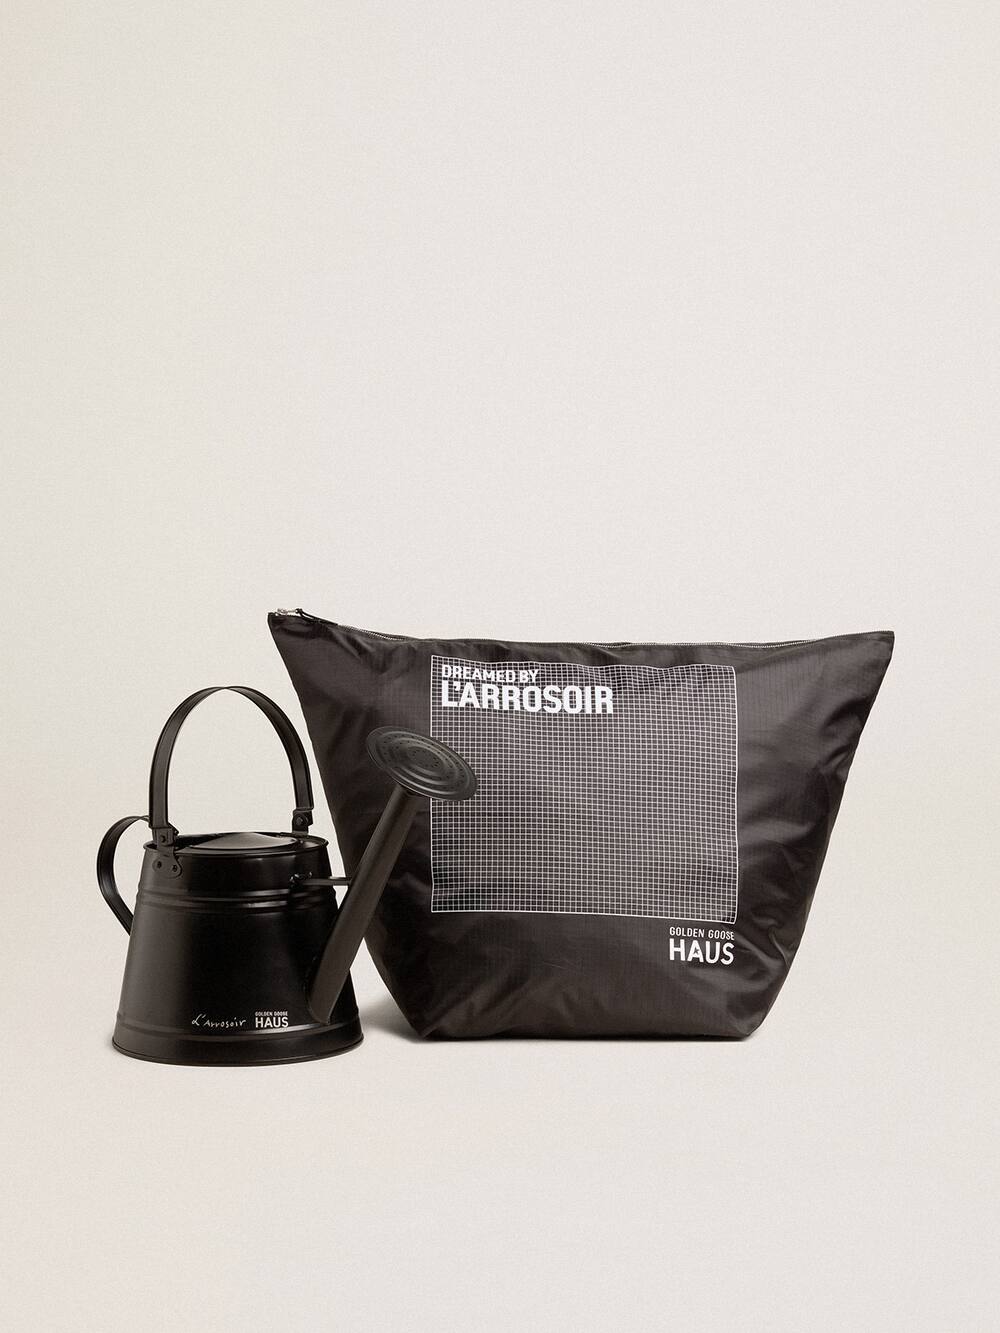 Golden Goose - Watering can Dreamed by L'Arrosoir HAUS of Dreamers exclusive in 